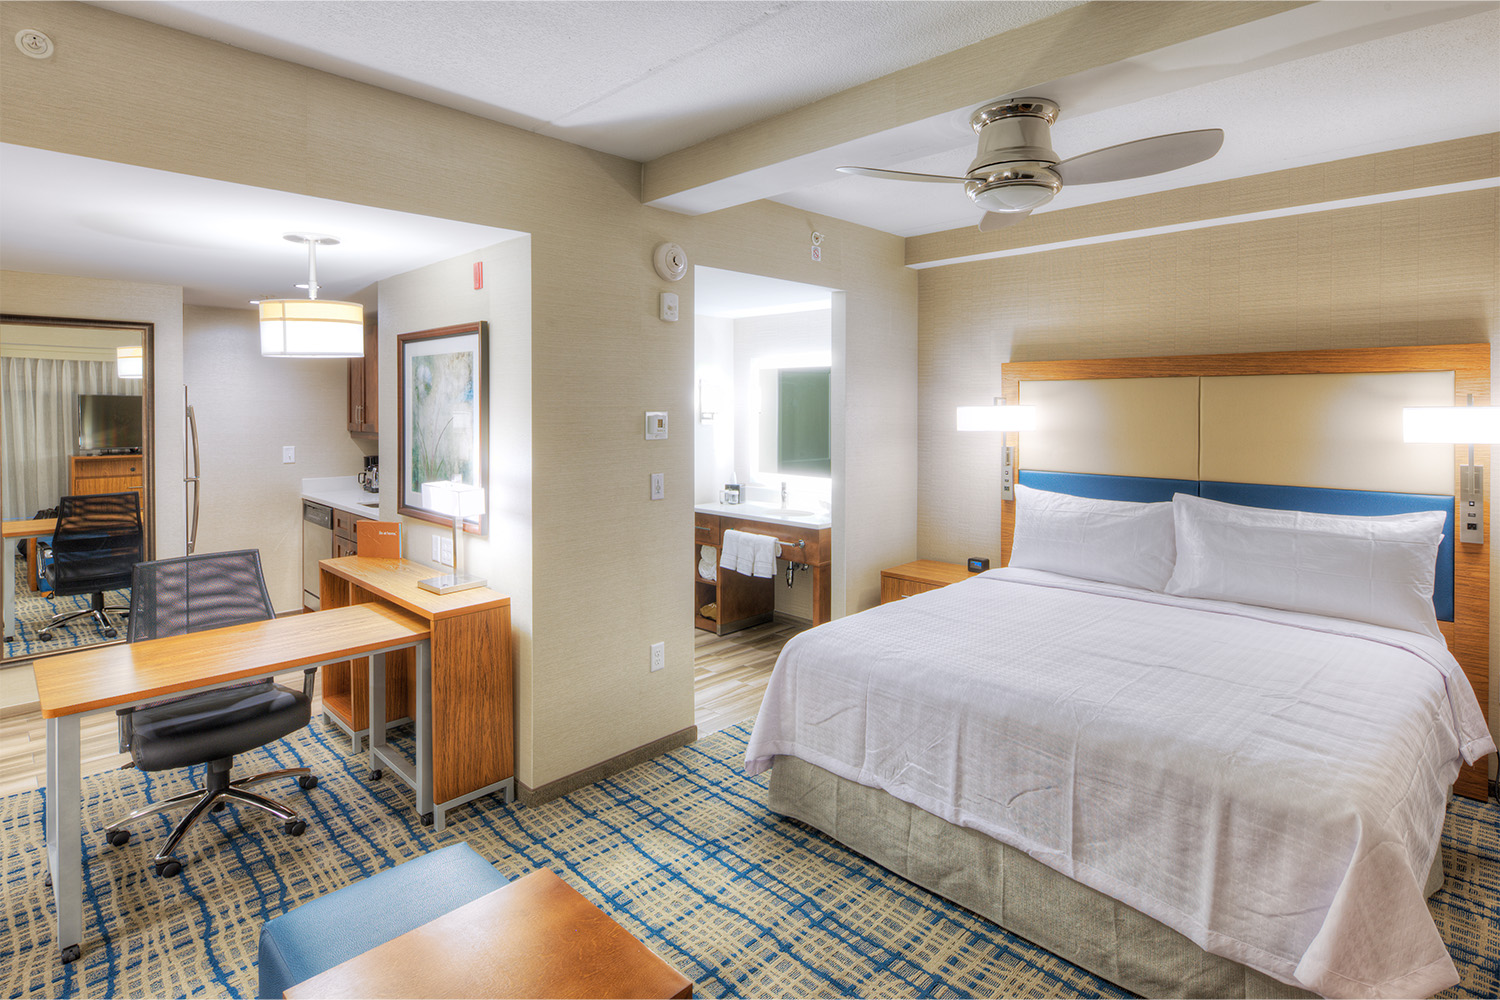 Single-suite room with plush bed, clean bathroom, and desk area 